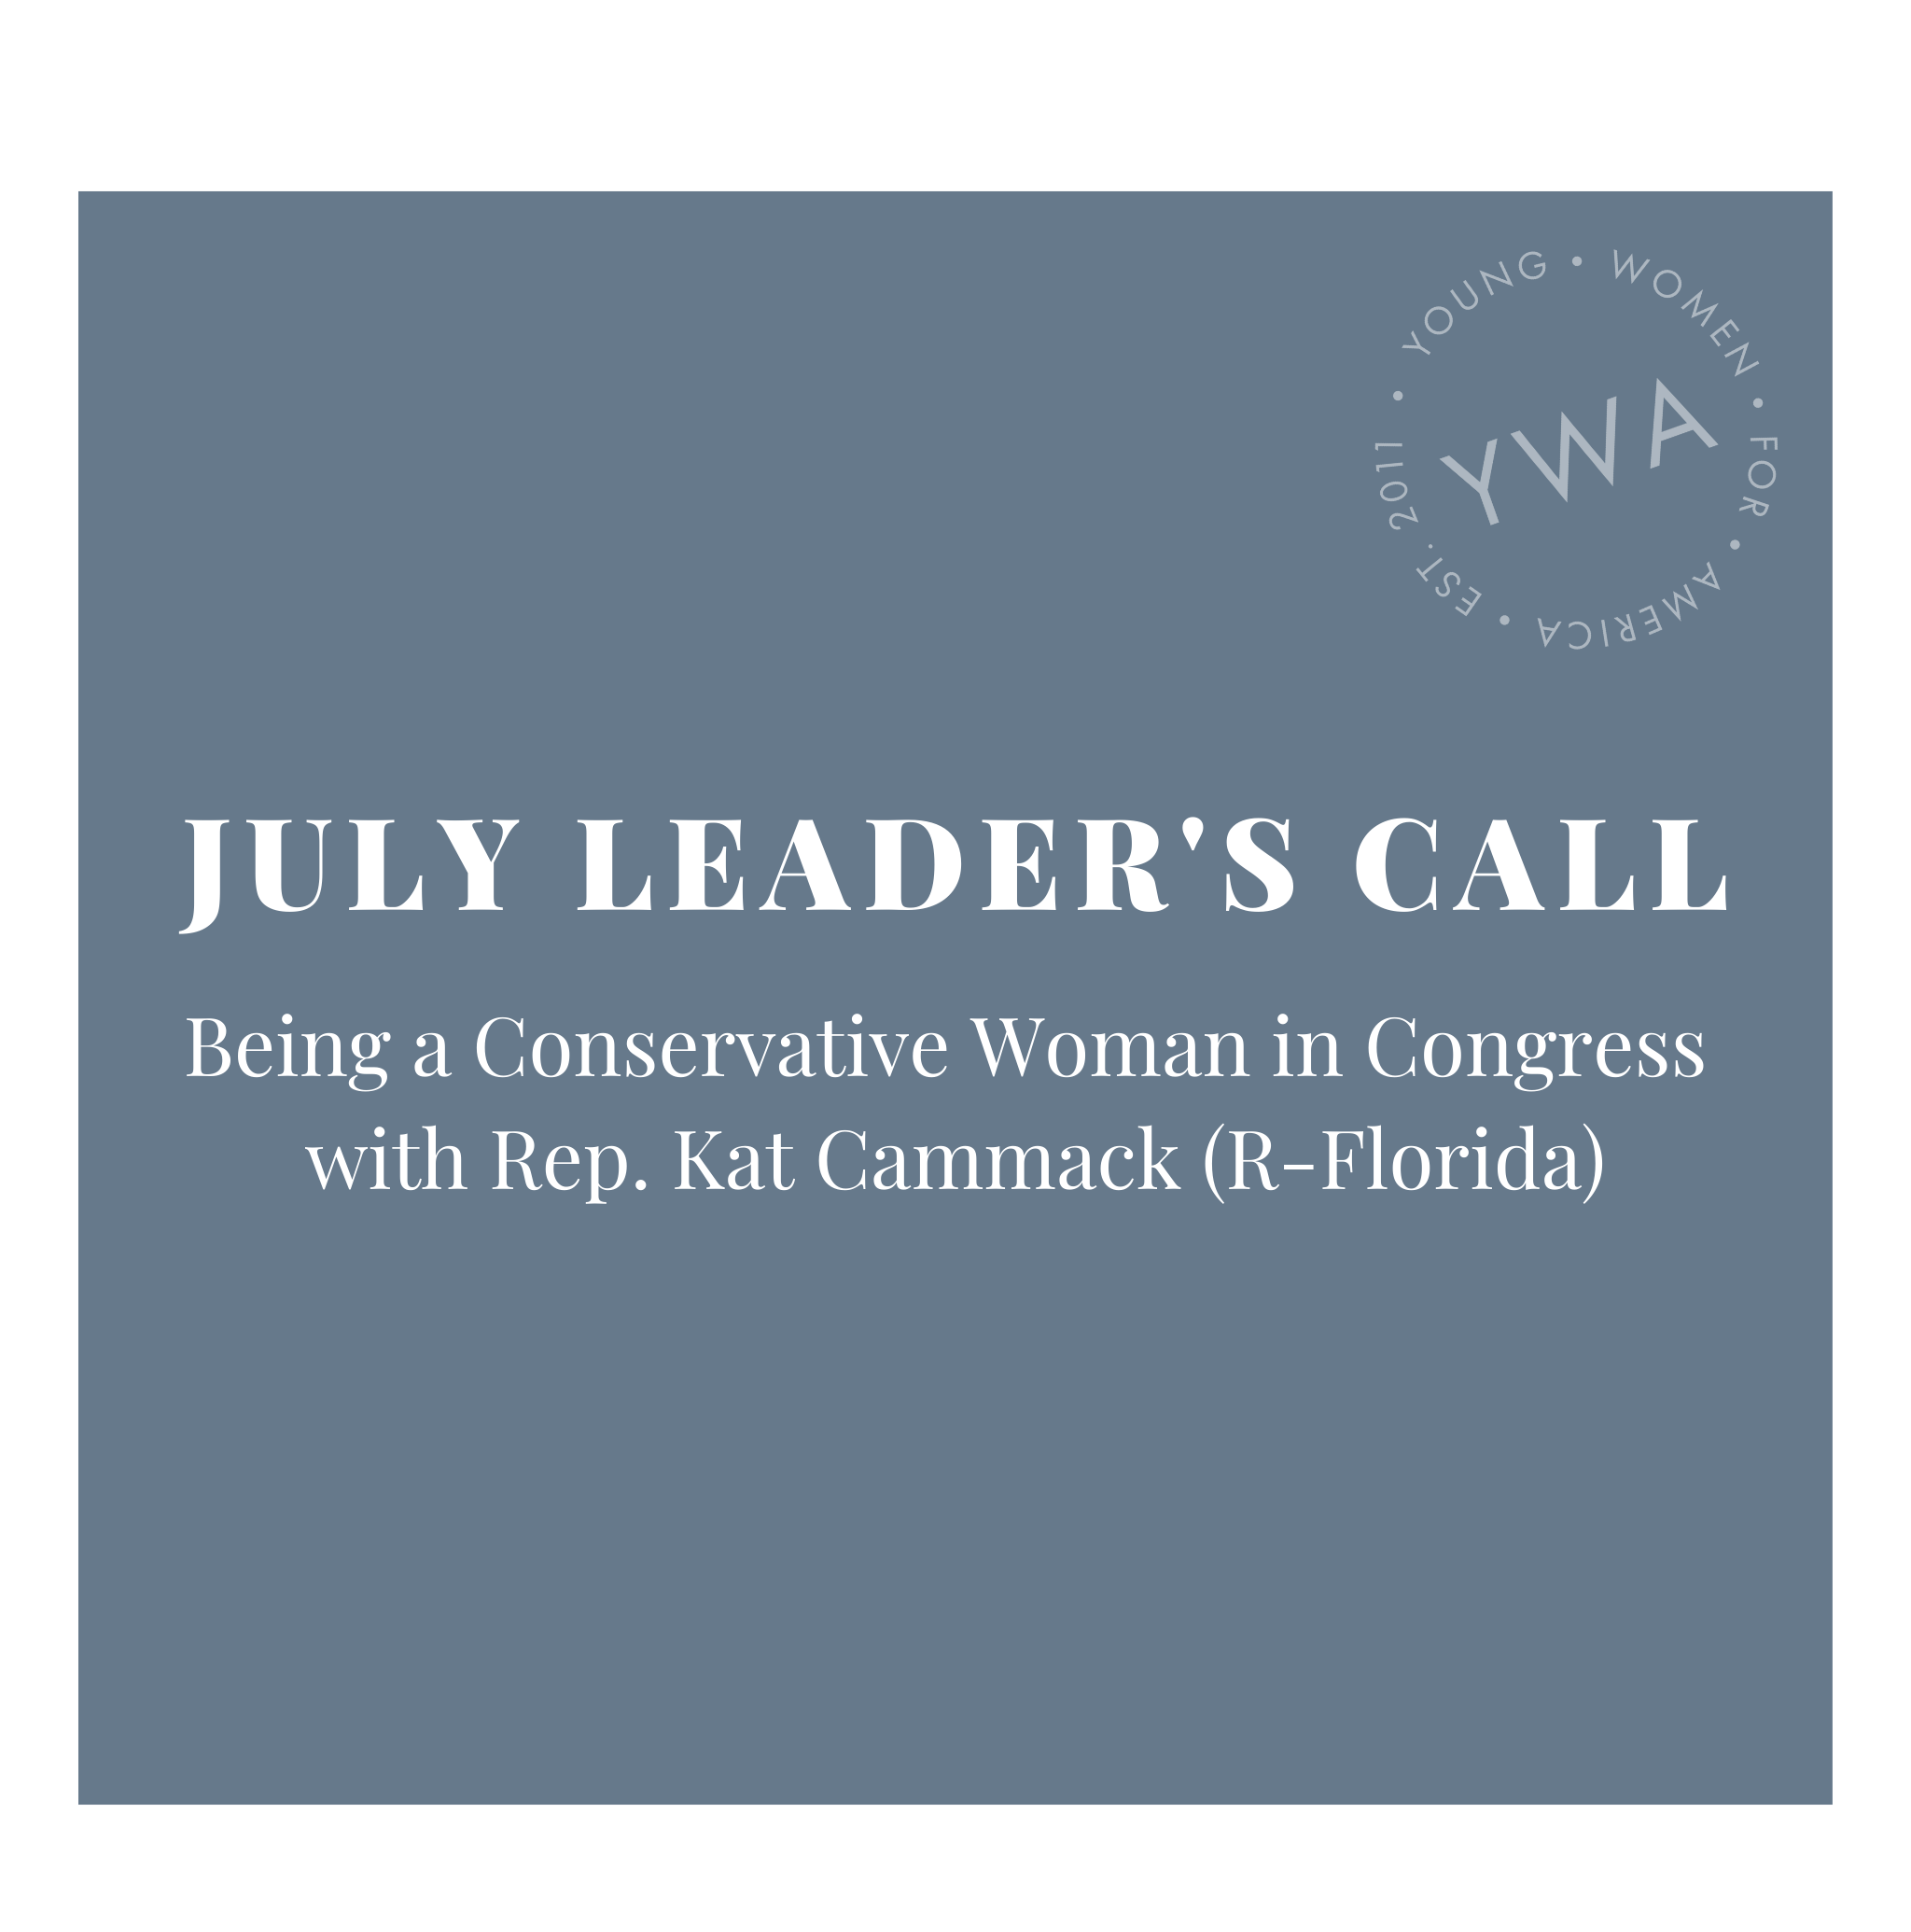 YWA July Leader’s Call with Rep. Kat Cammack